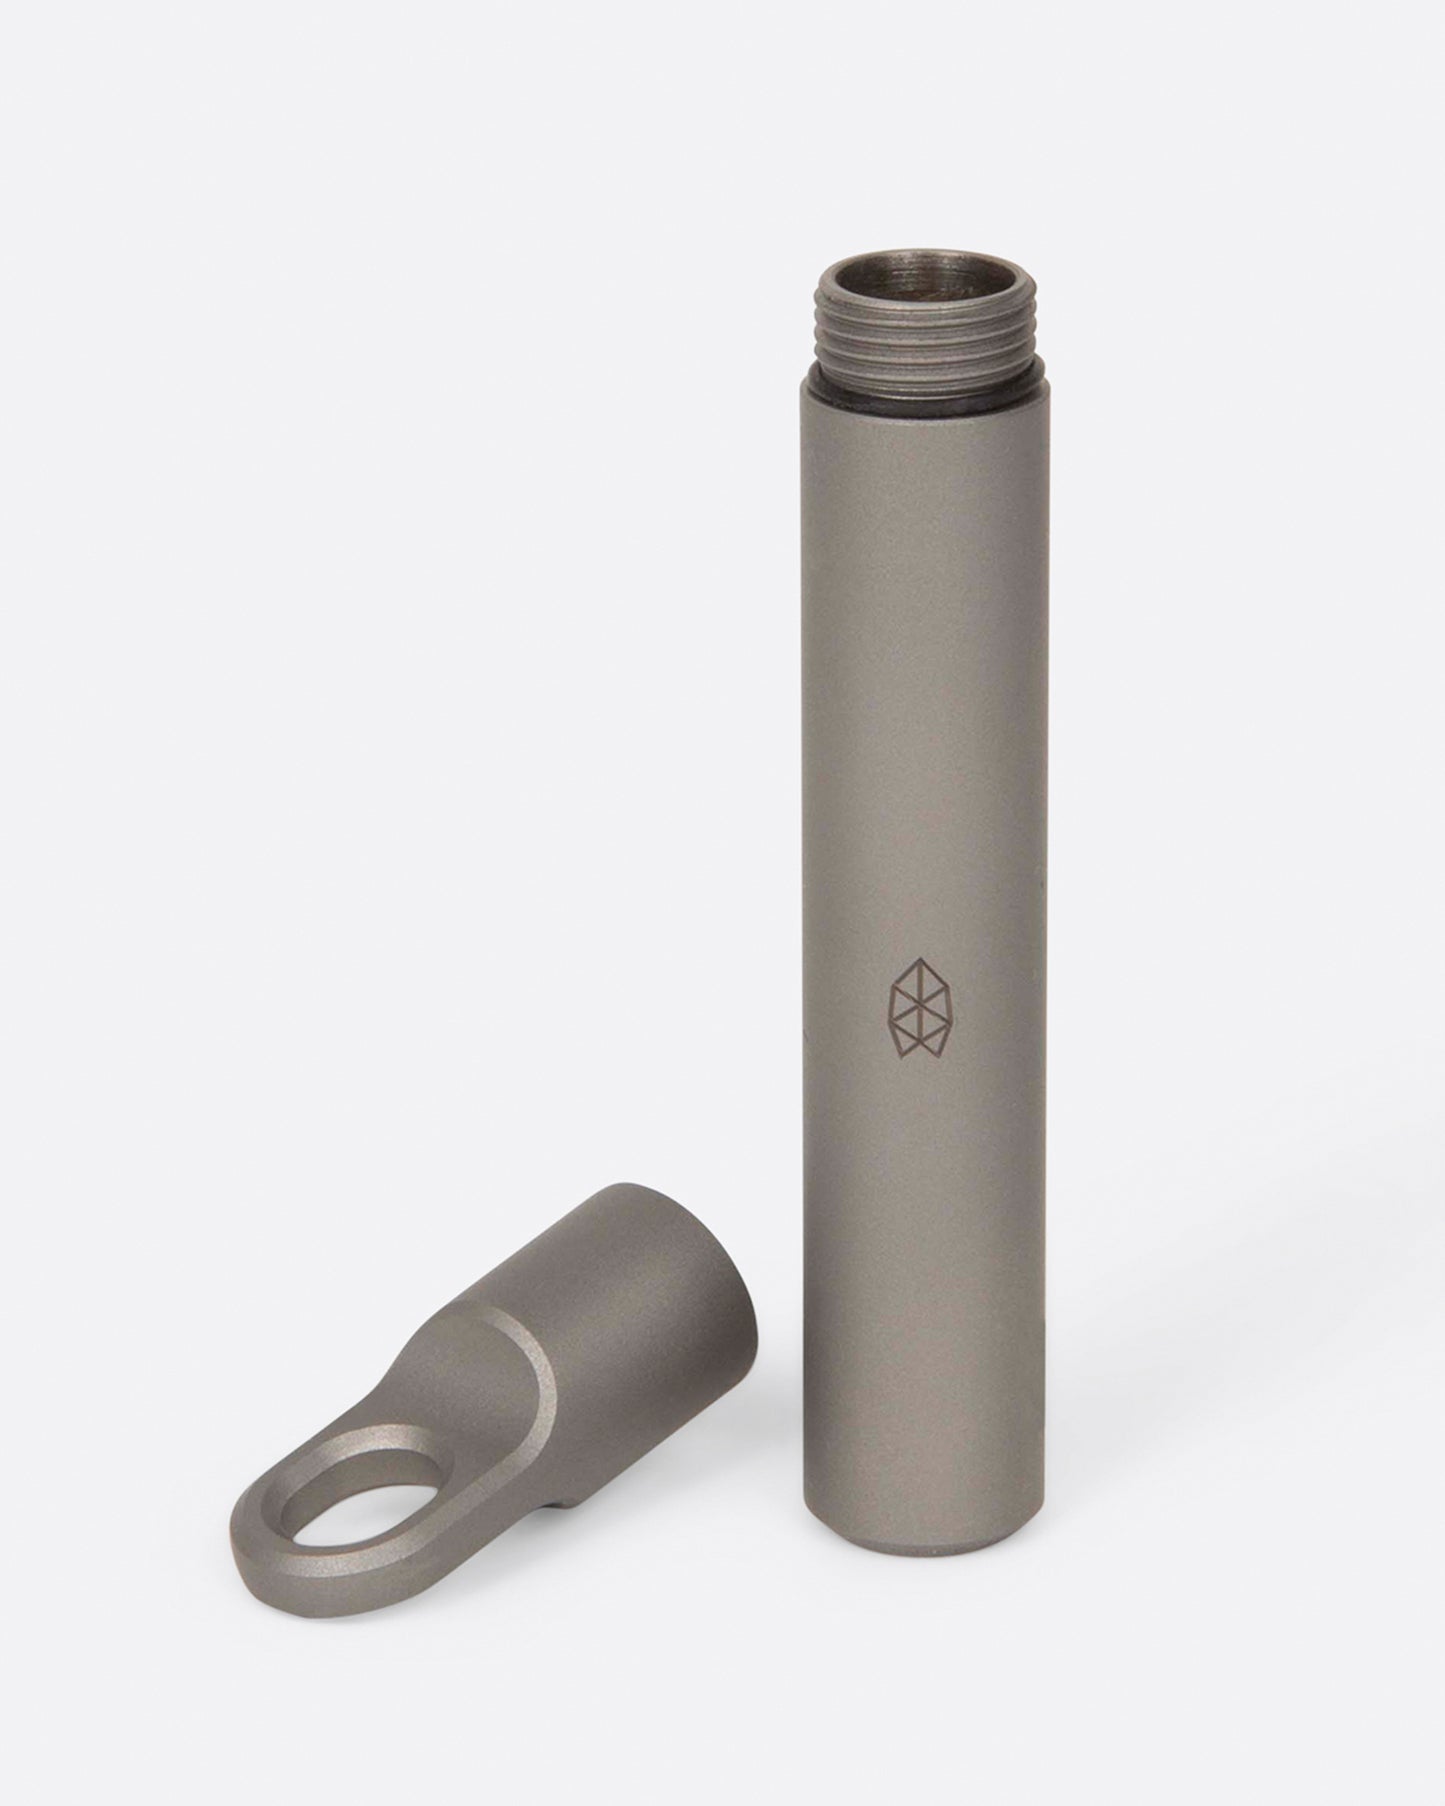 A pocket-size titanium canister shown with its lid off and toothpicks spilling out.